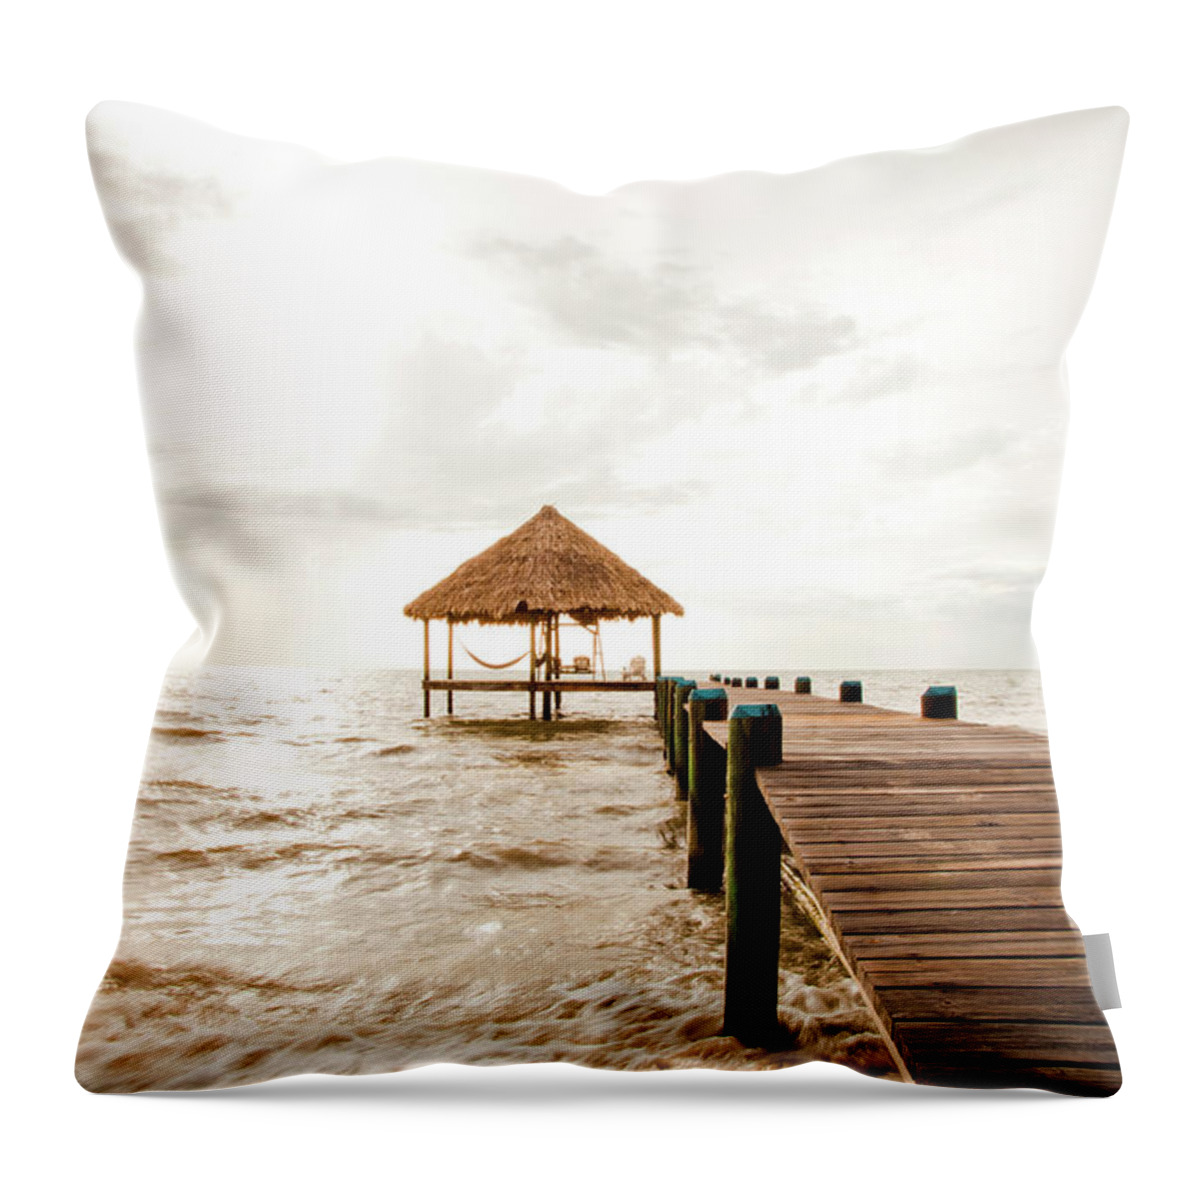 Tranquility Throw Pillow featuring the photograph A Serene Dock And Cabana At Sunrise by Adam Hester